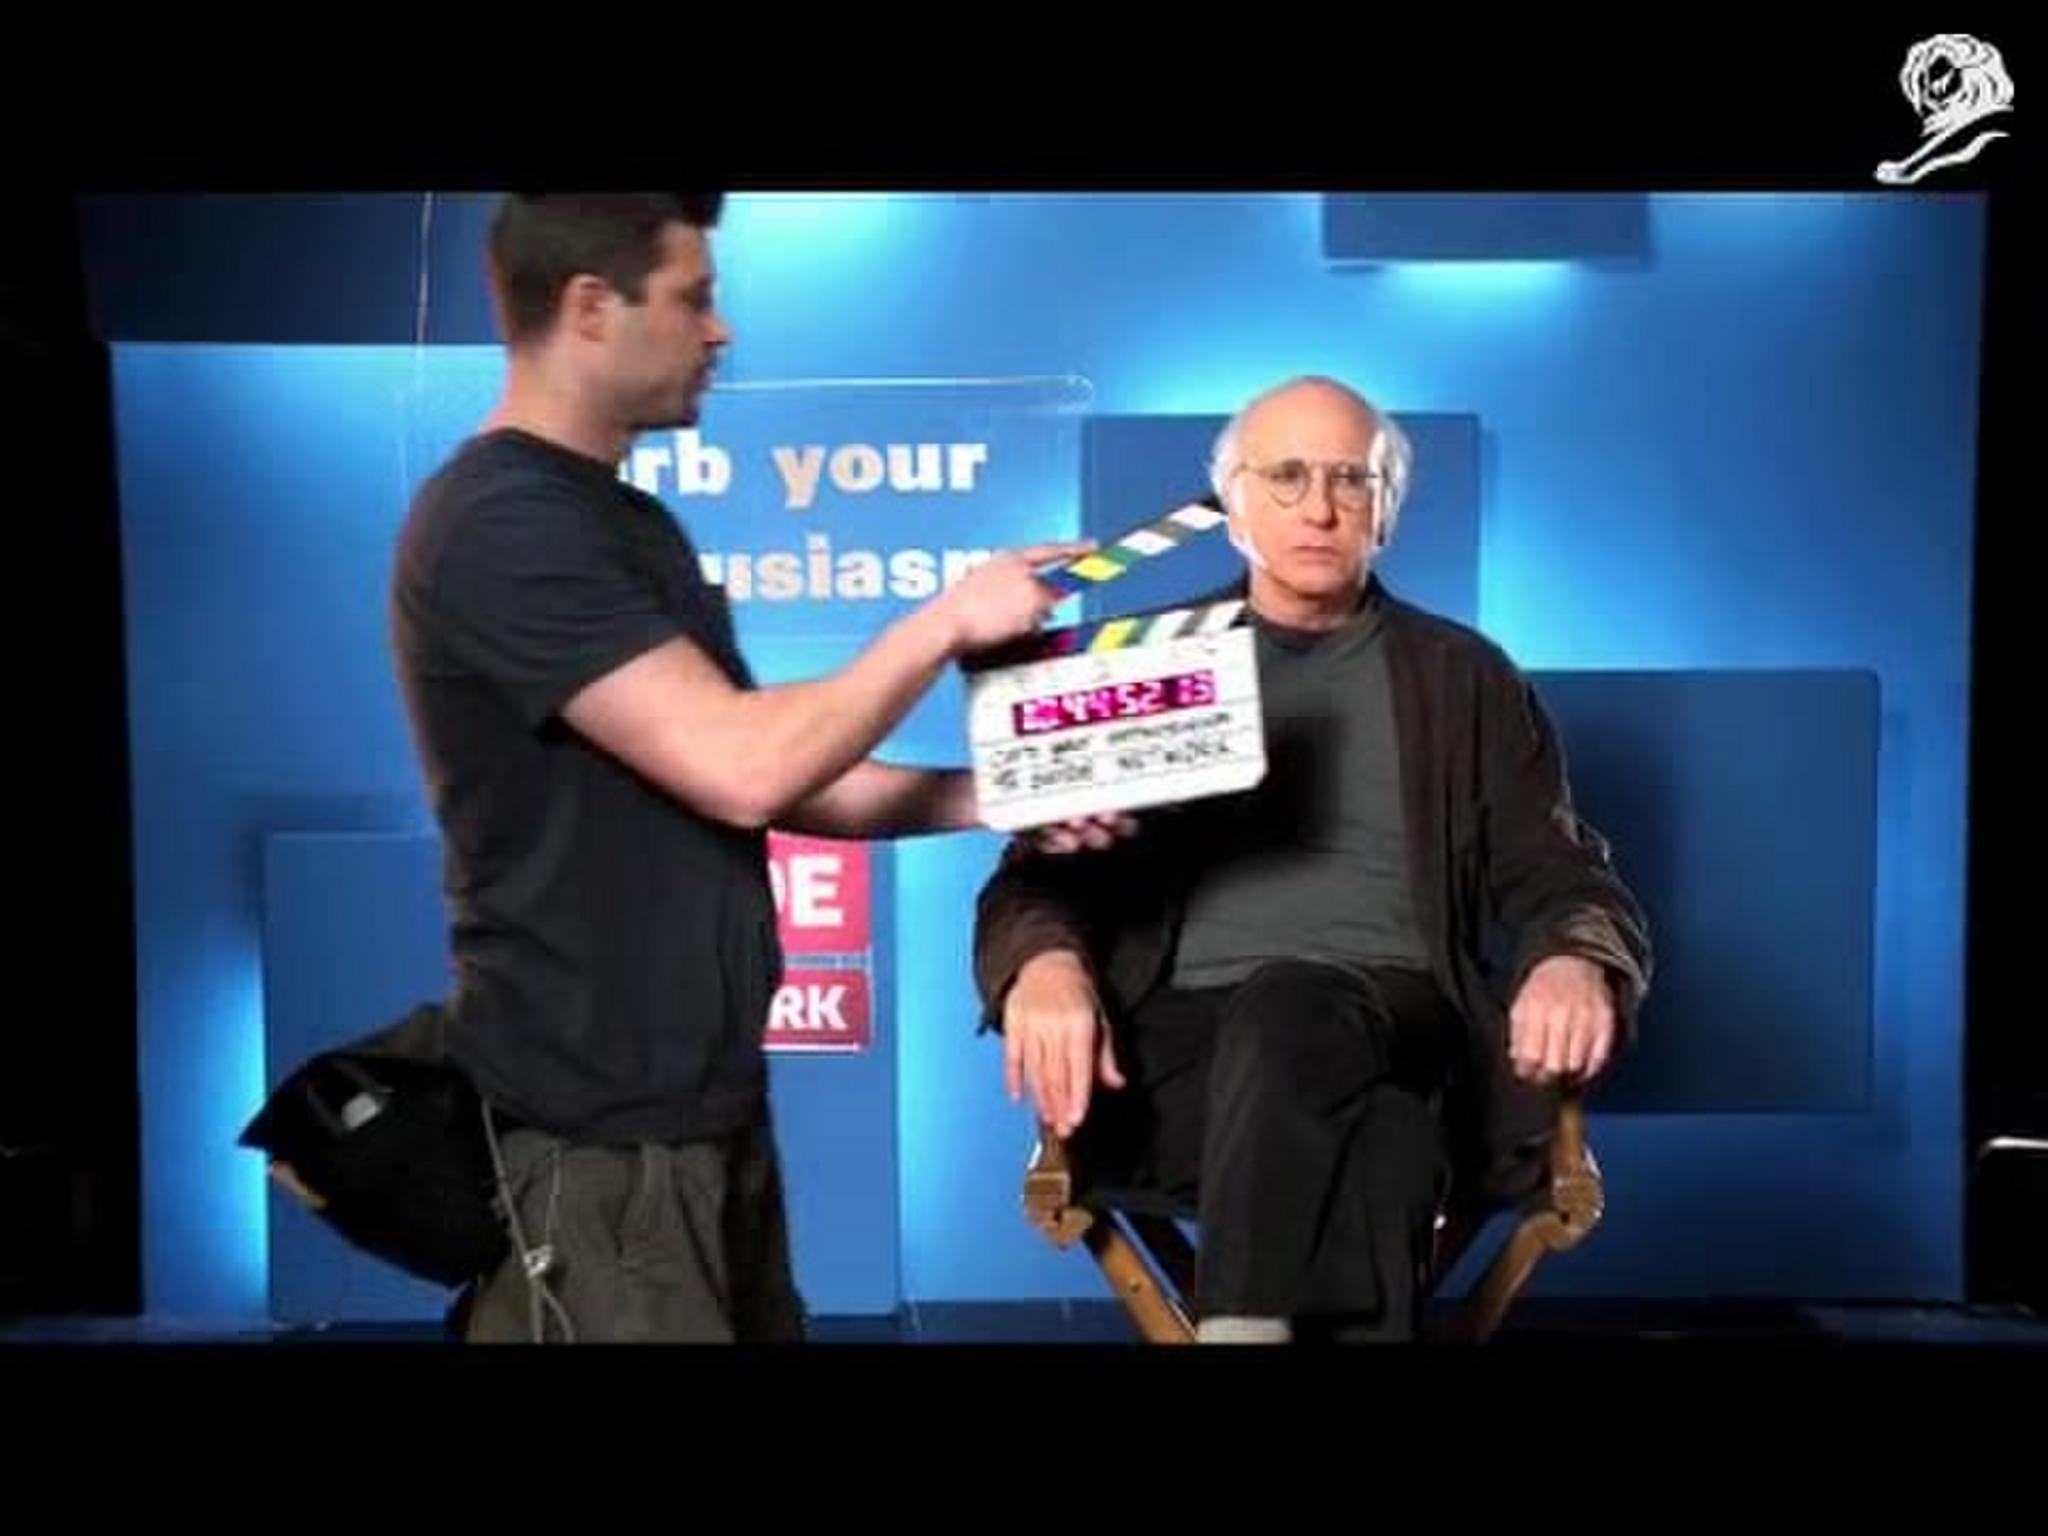 "CURB YOUR ENTHUSIASM" LAUNCH